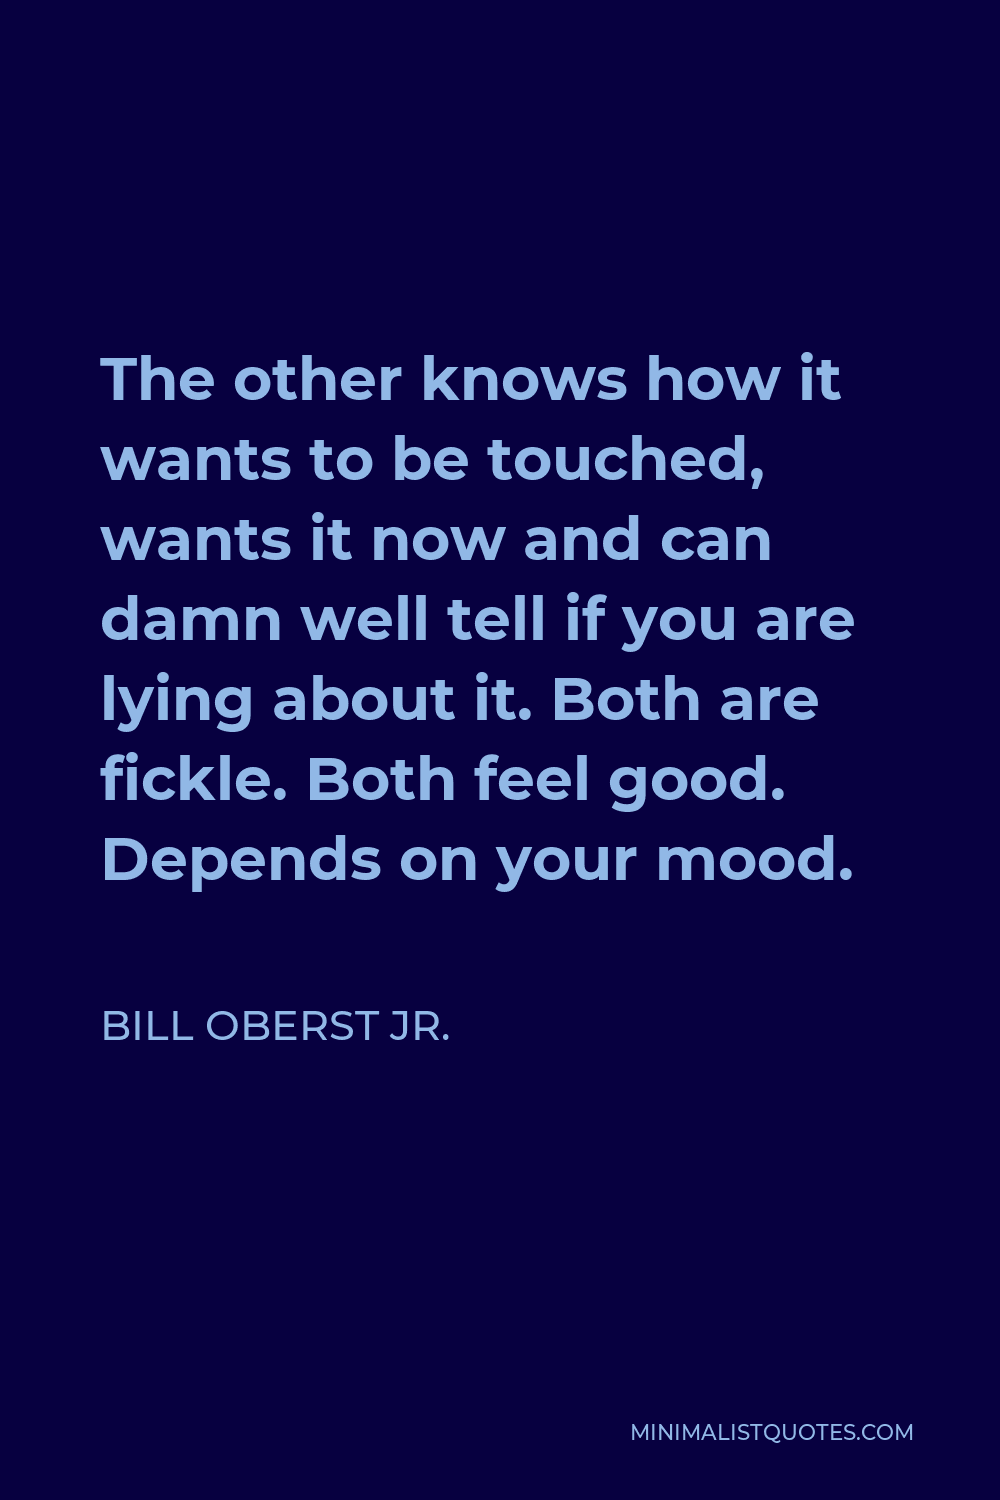 Bill Oberst Jr. Quote - The other knows how it wants to be touched, wants it now and can damn well tell if you are lying about it. Both are fickle. Both feel good. Depends on your mood.